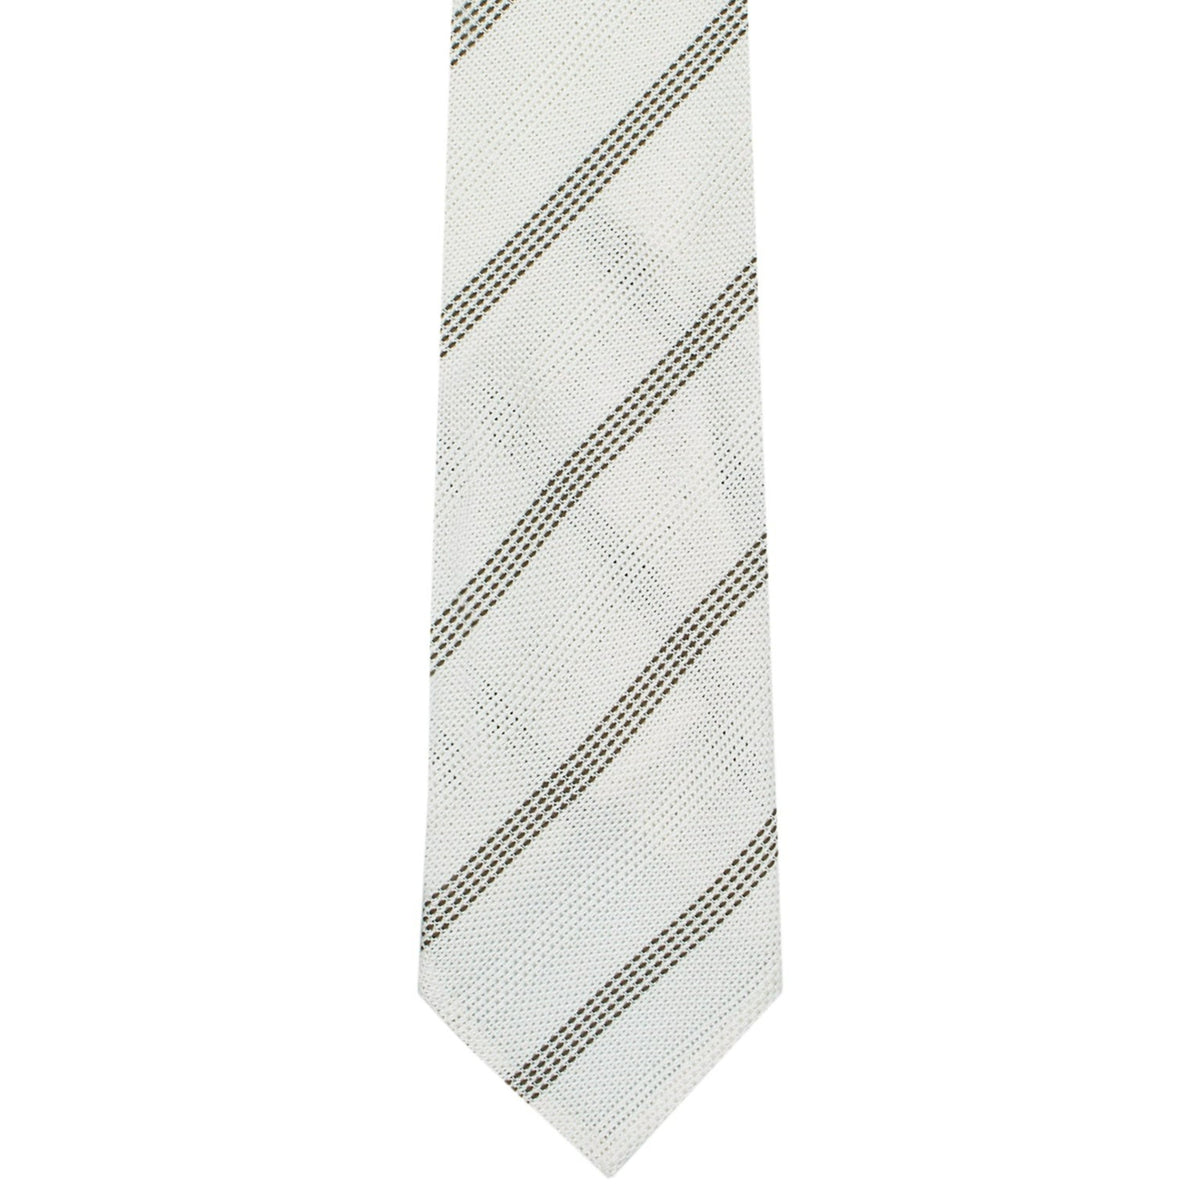 Anversa silk tie with white background and brown stripes